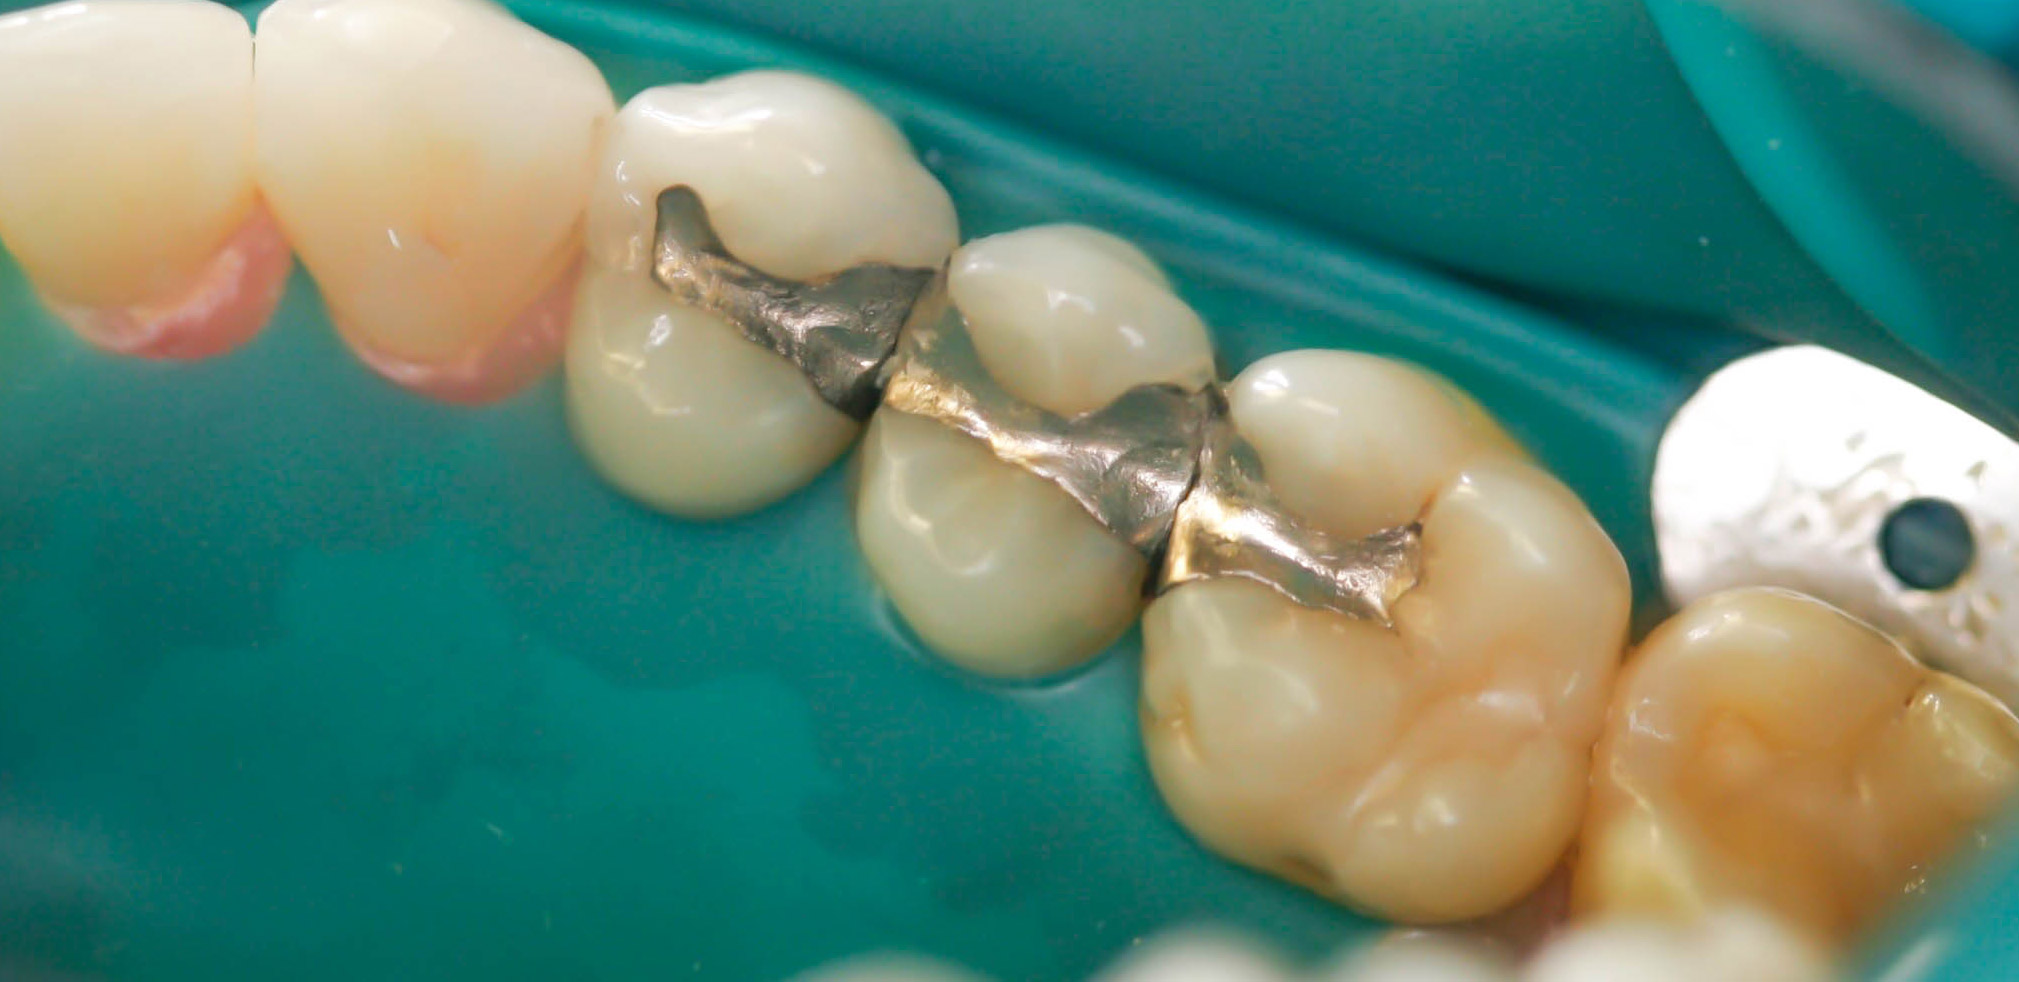 Safe amalgam or mercury filling removal and replacement with biocompatible tooth colored fillings -- the Before picture